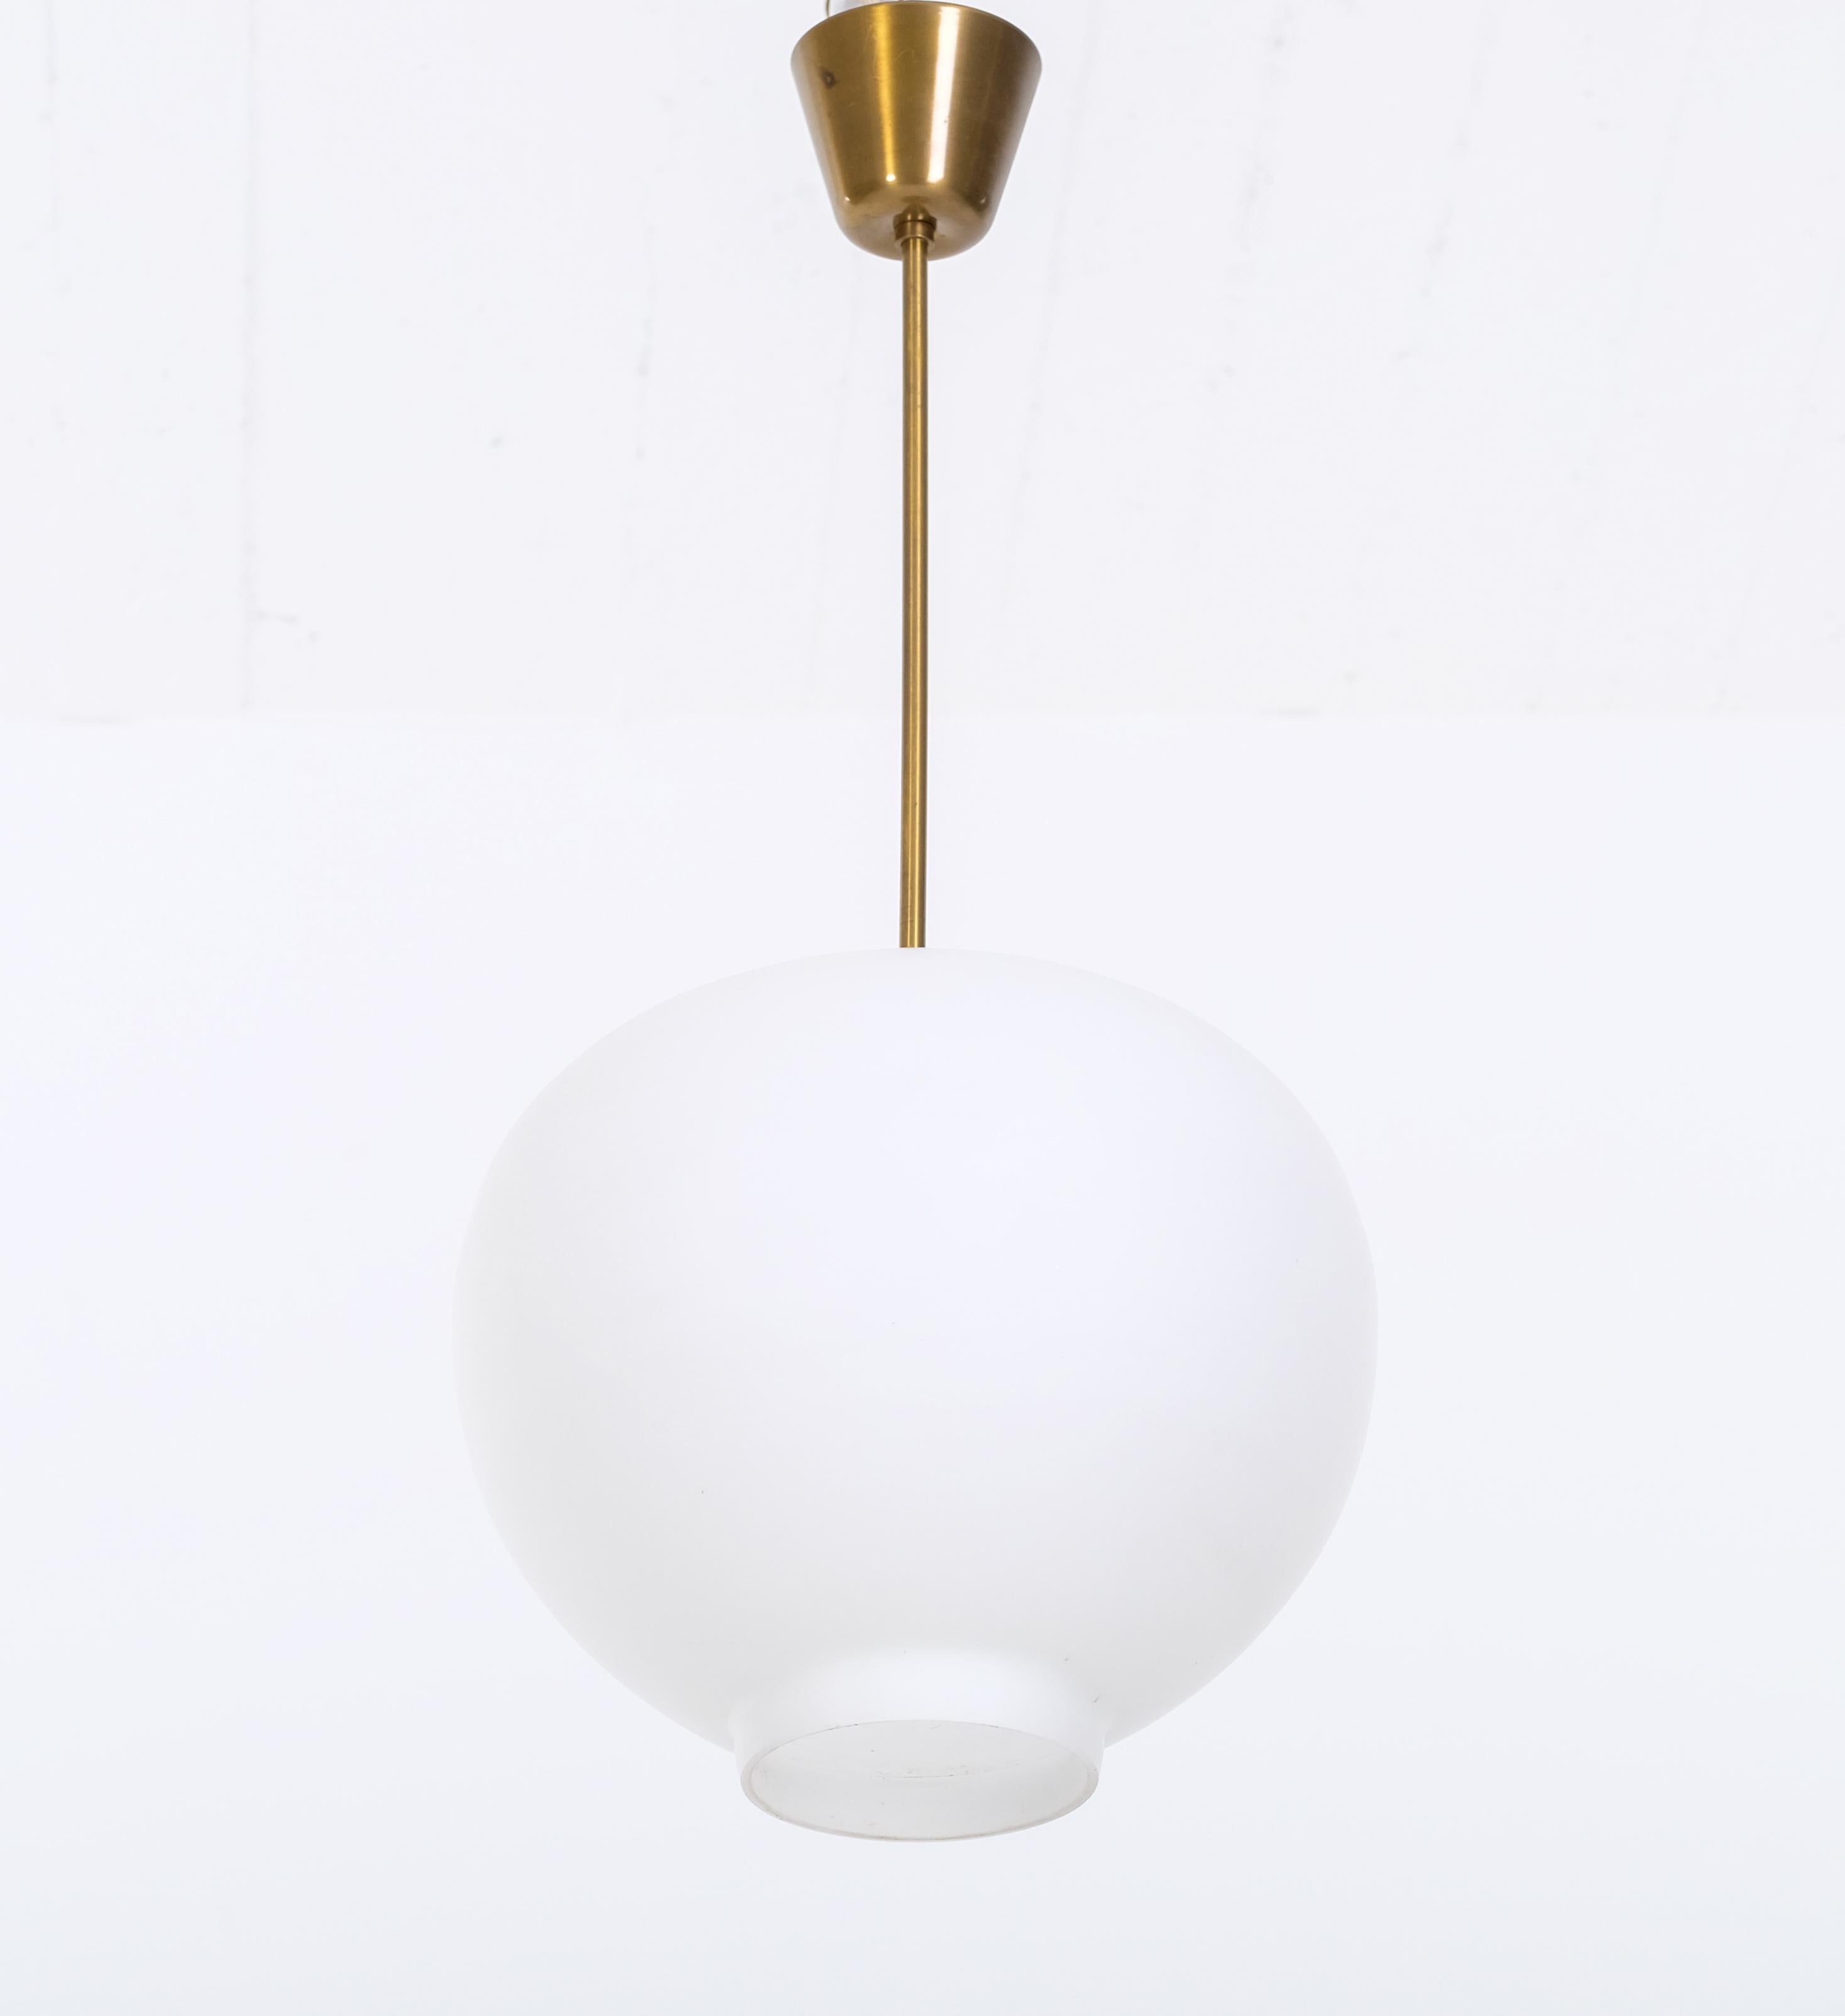 Mid-20th Century Glass & Brass pendant by Böhlmarks, Sweden, 1950s For Sale